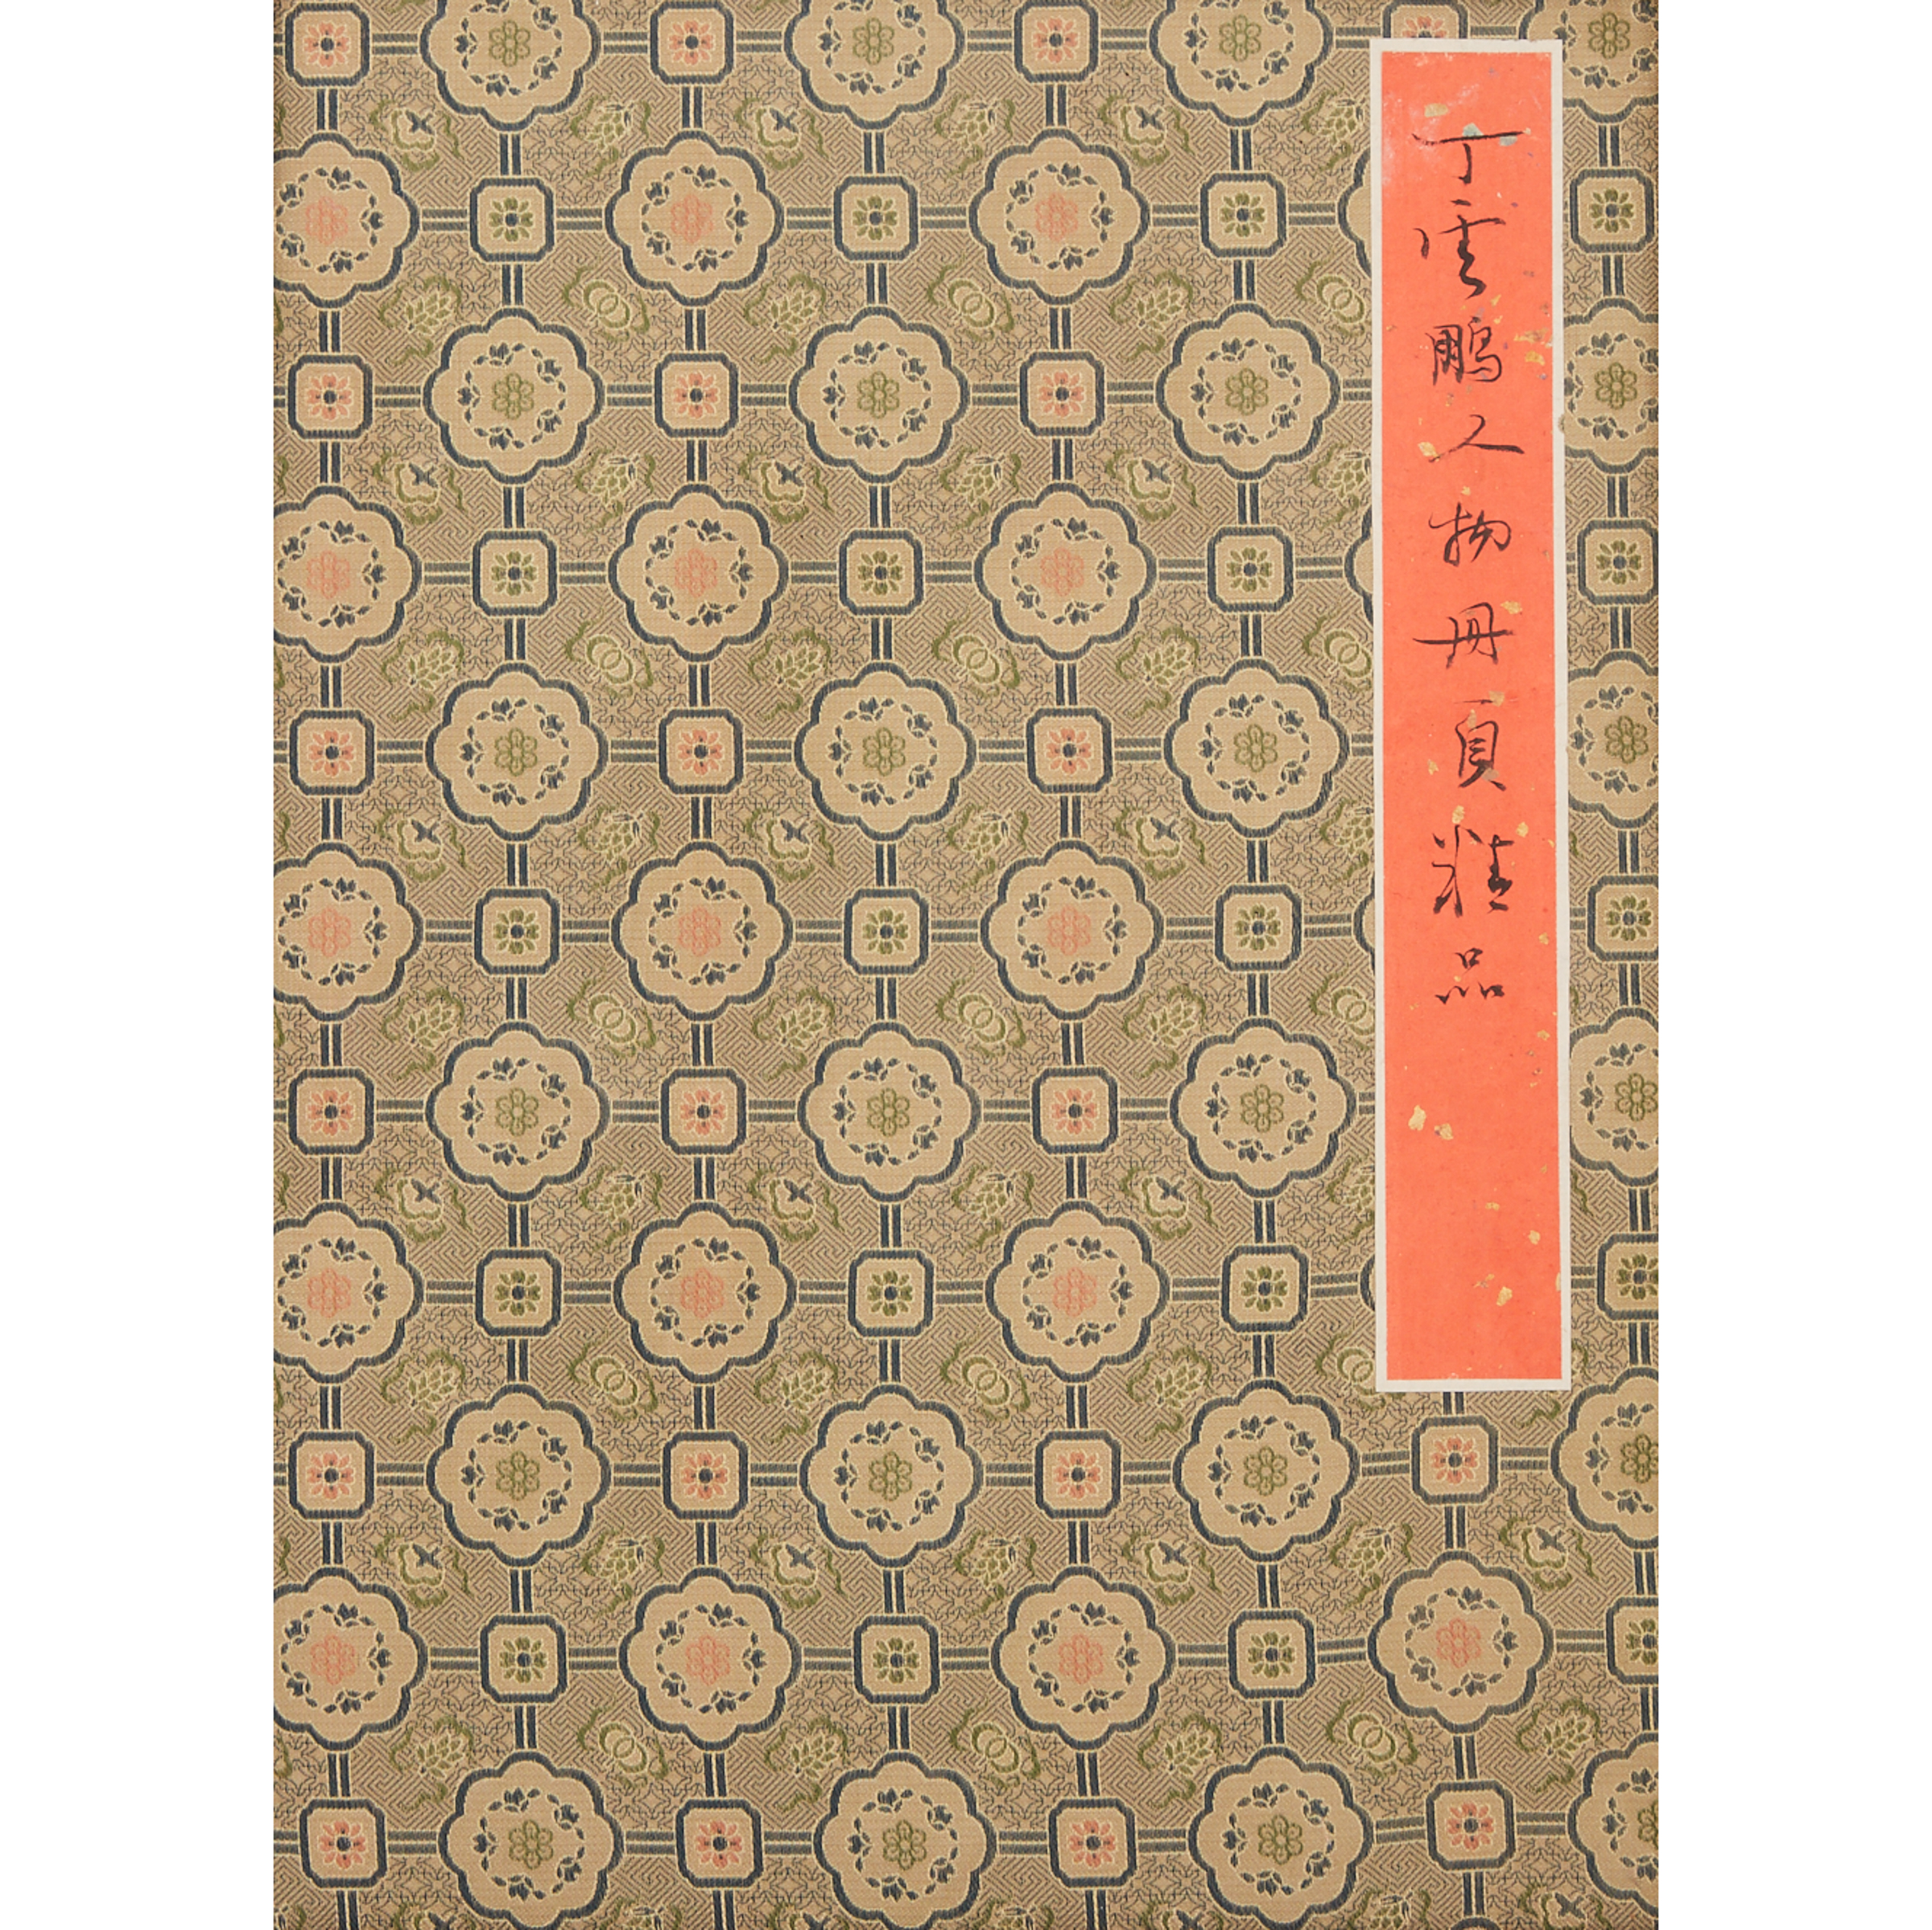 After Ding Yunpeng (1547-1628), An Album of Six Bodhi Leaf Sutra Paintings